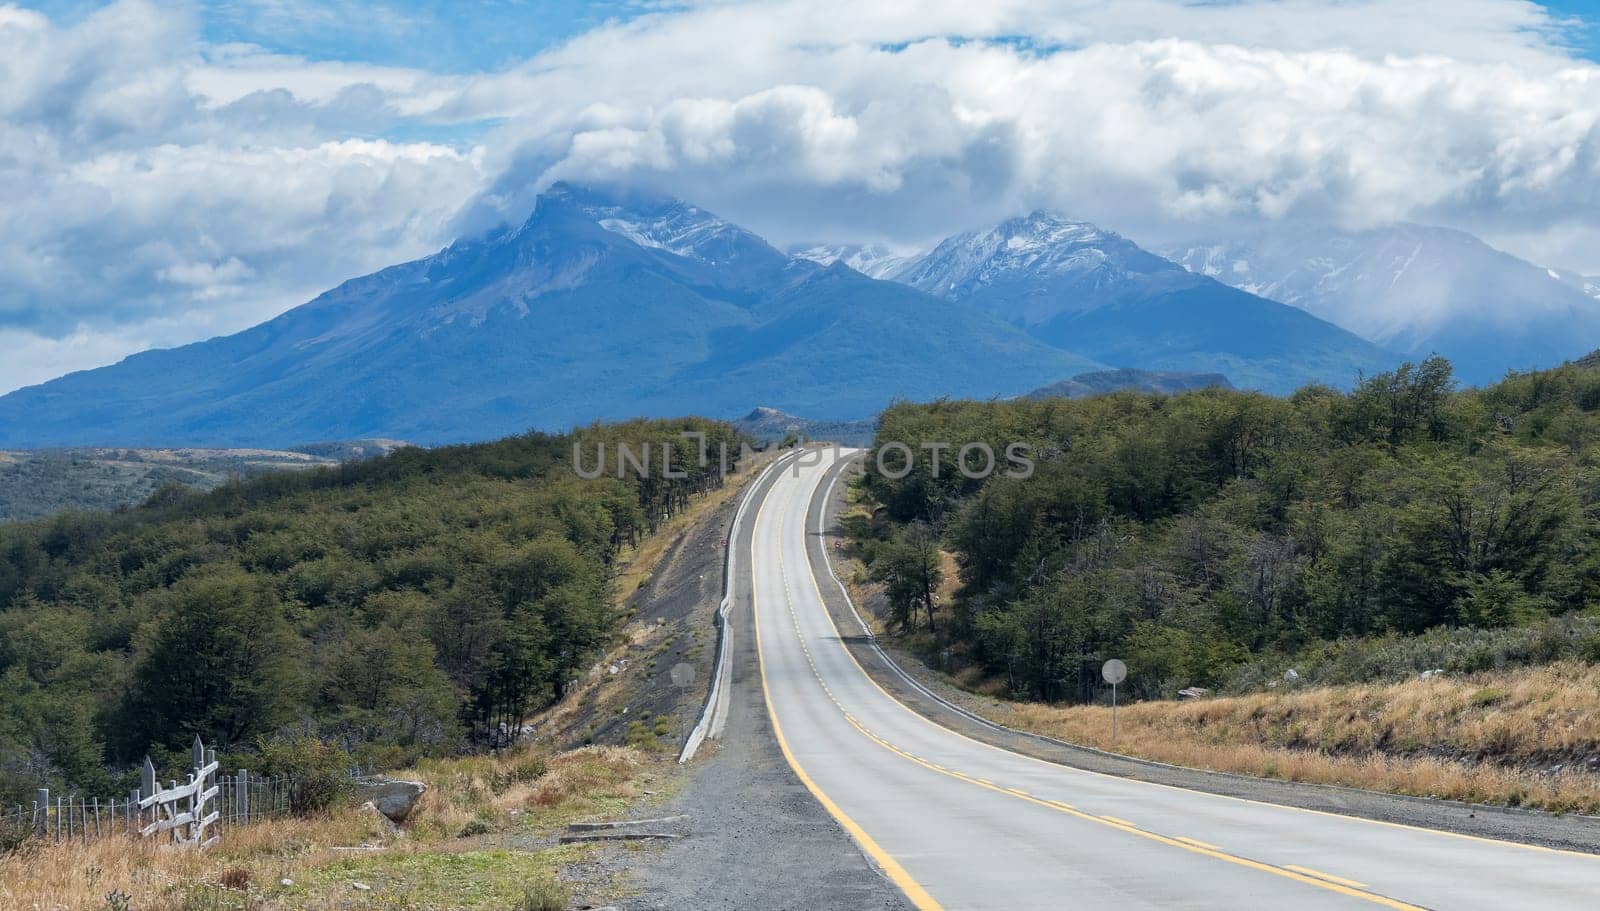 Scenic Road Leading to Dramatic Mountains and Sky by FerradalFCG